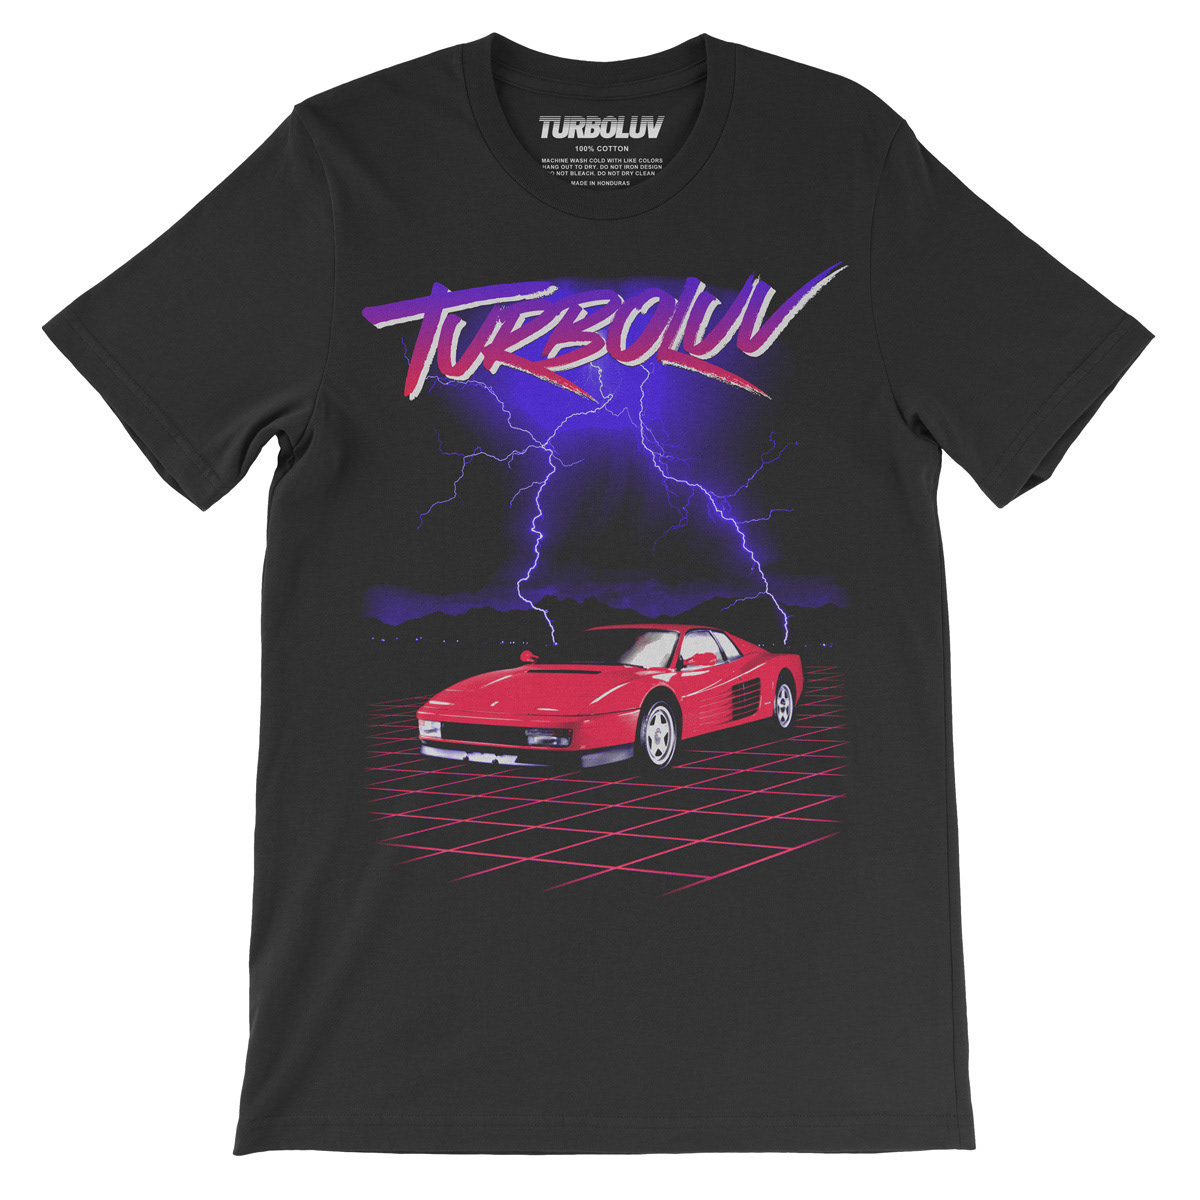 t-shirt graphic tees Retro 80s retrowave Outrun Synthwave